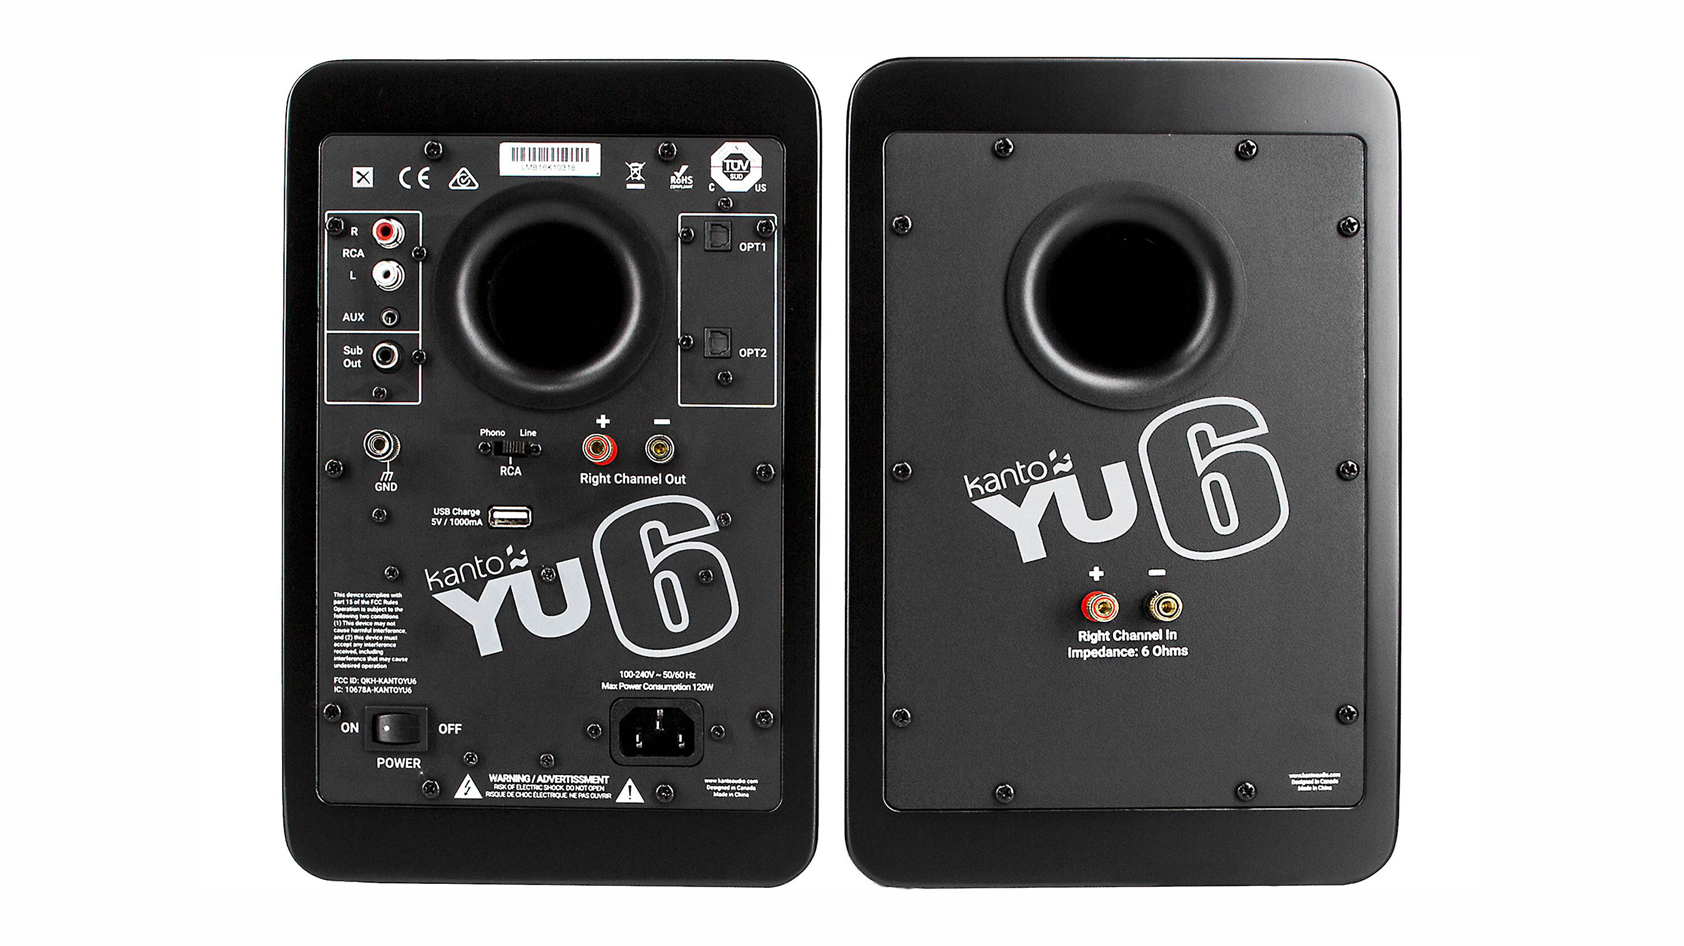 The Kanto YU6 in black shown from the back.